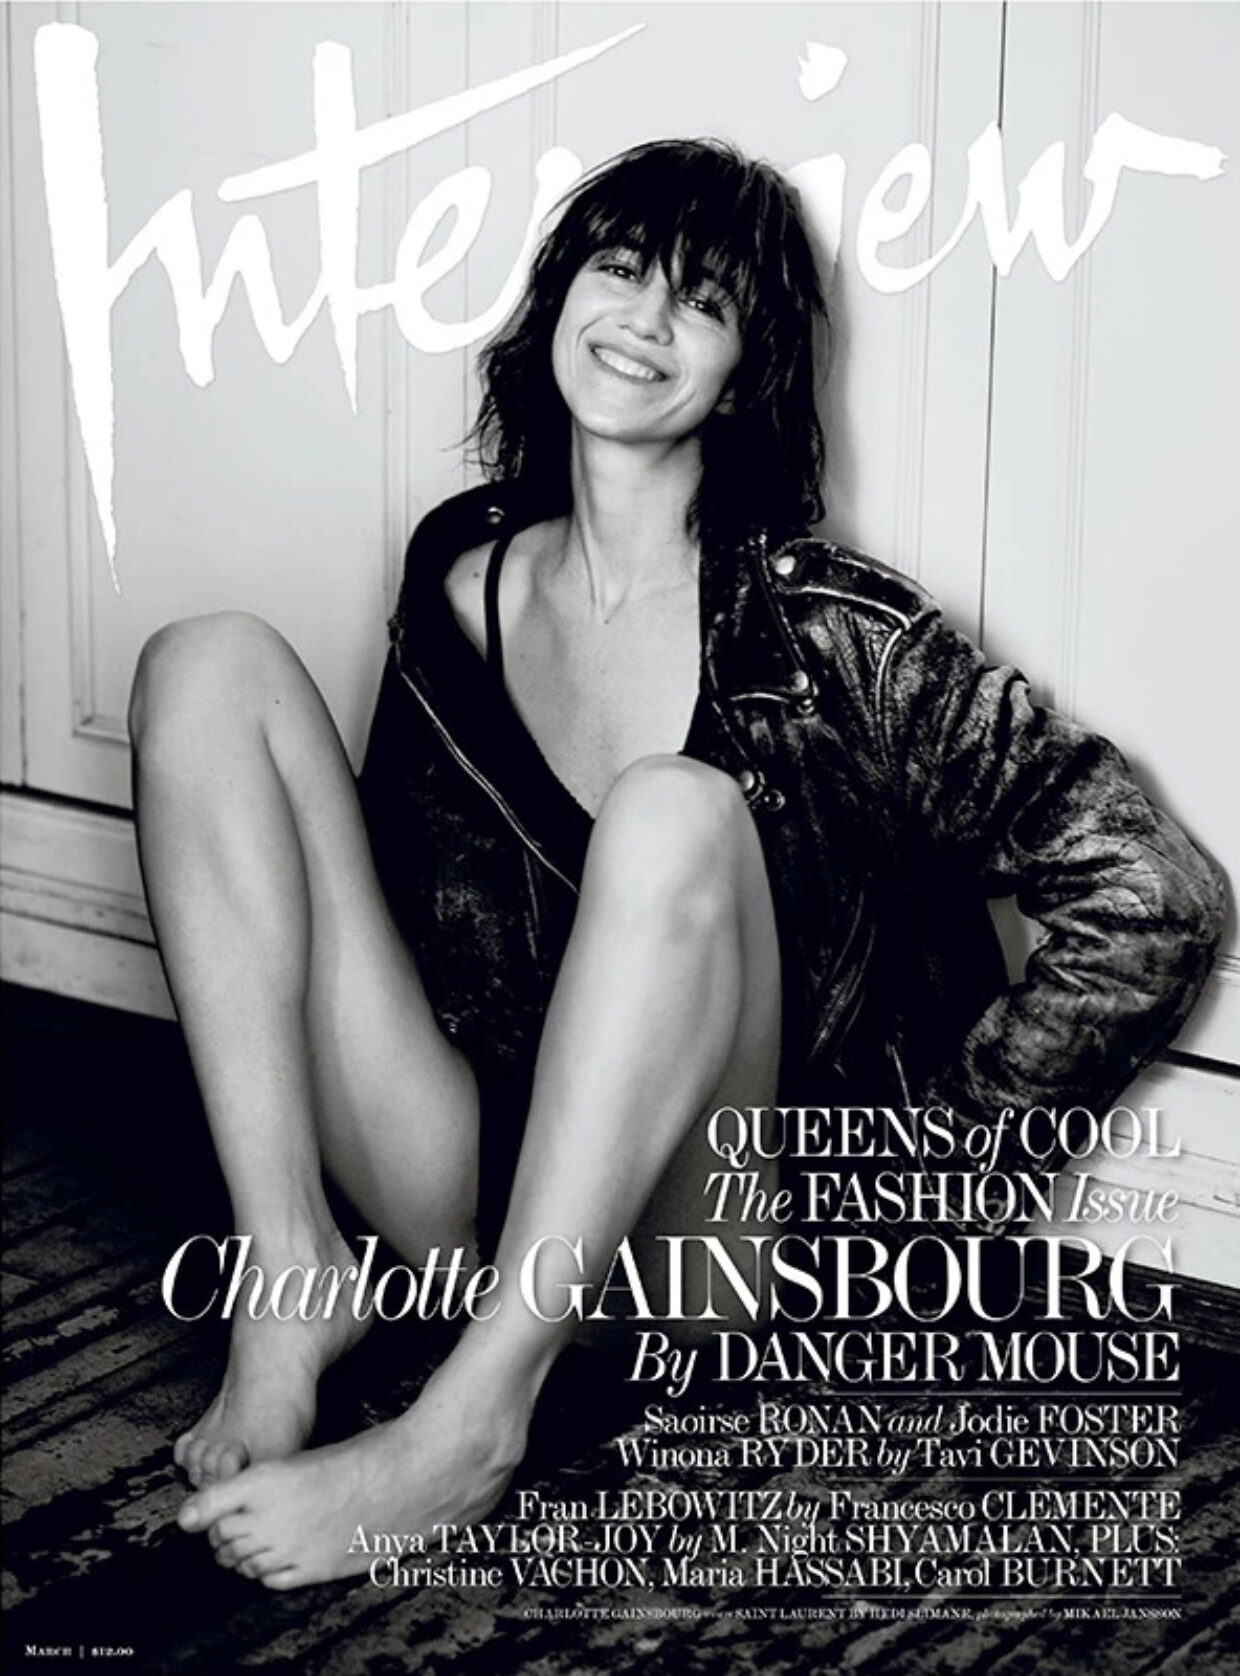 Charlotte Gainsbourg Covers Interview Magazine in the “Queens of Cool” Issue | 1